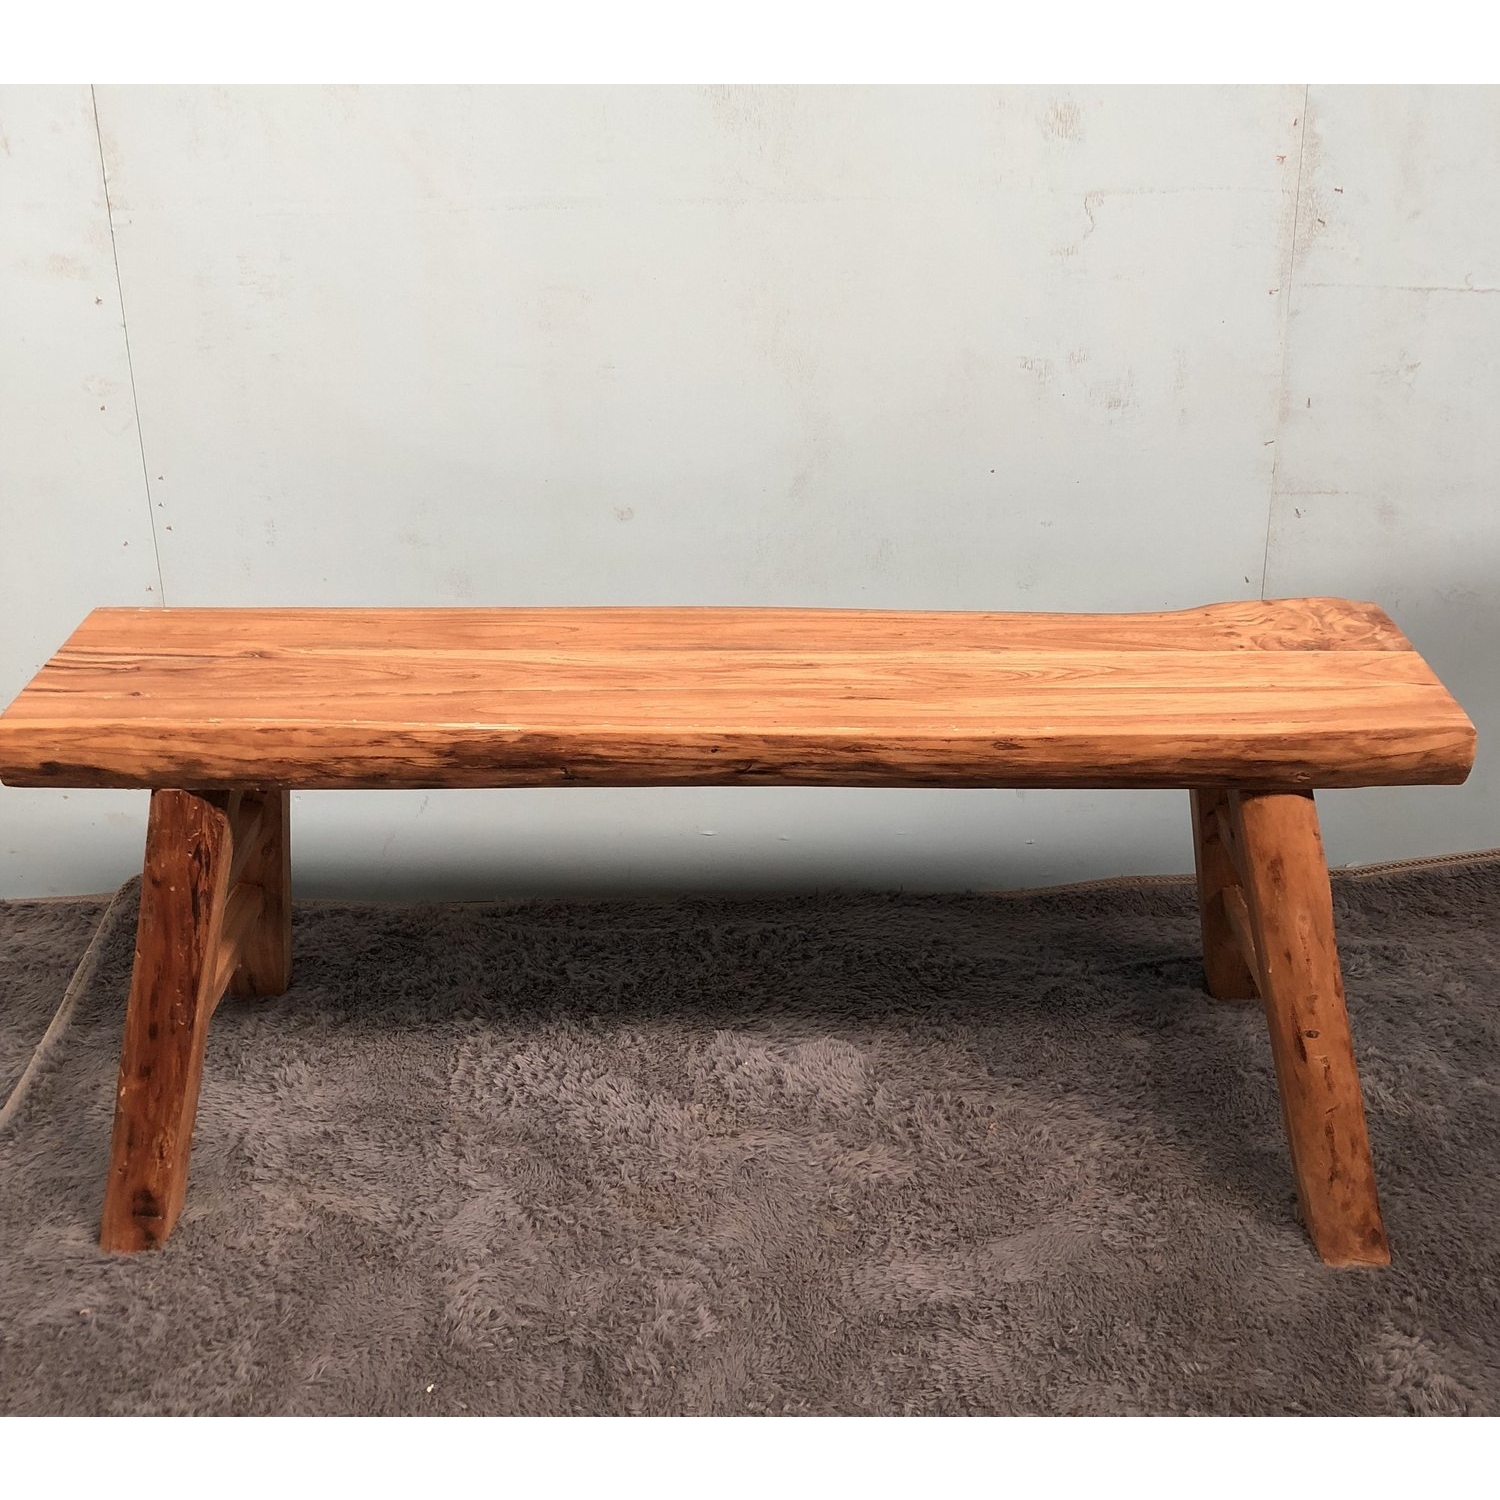 Traditional reclaimed wood bench